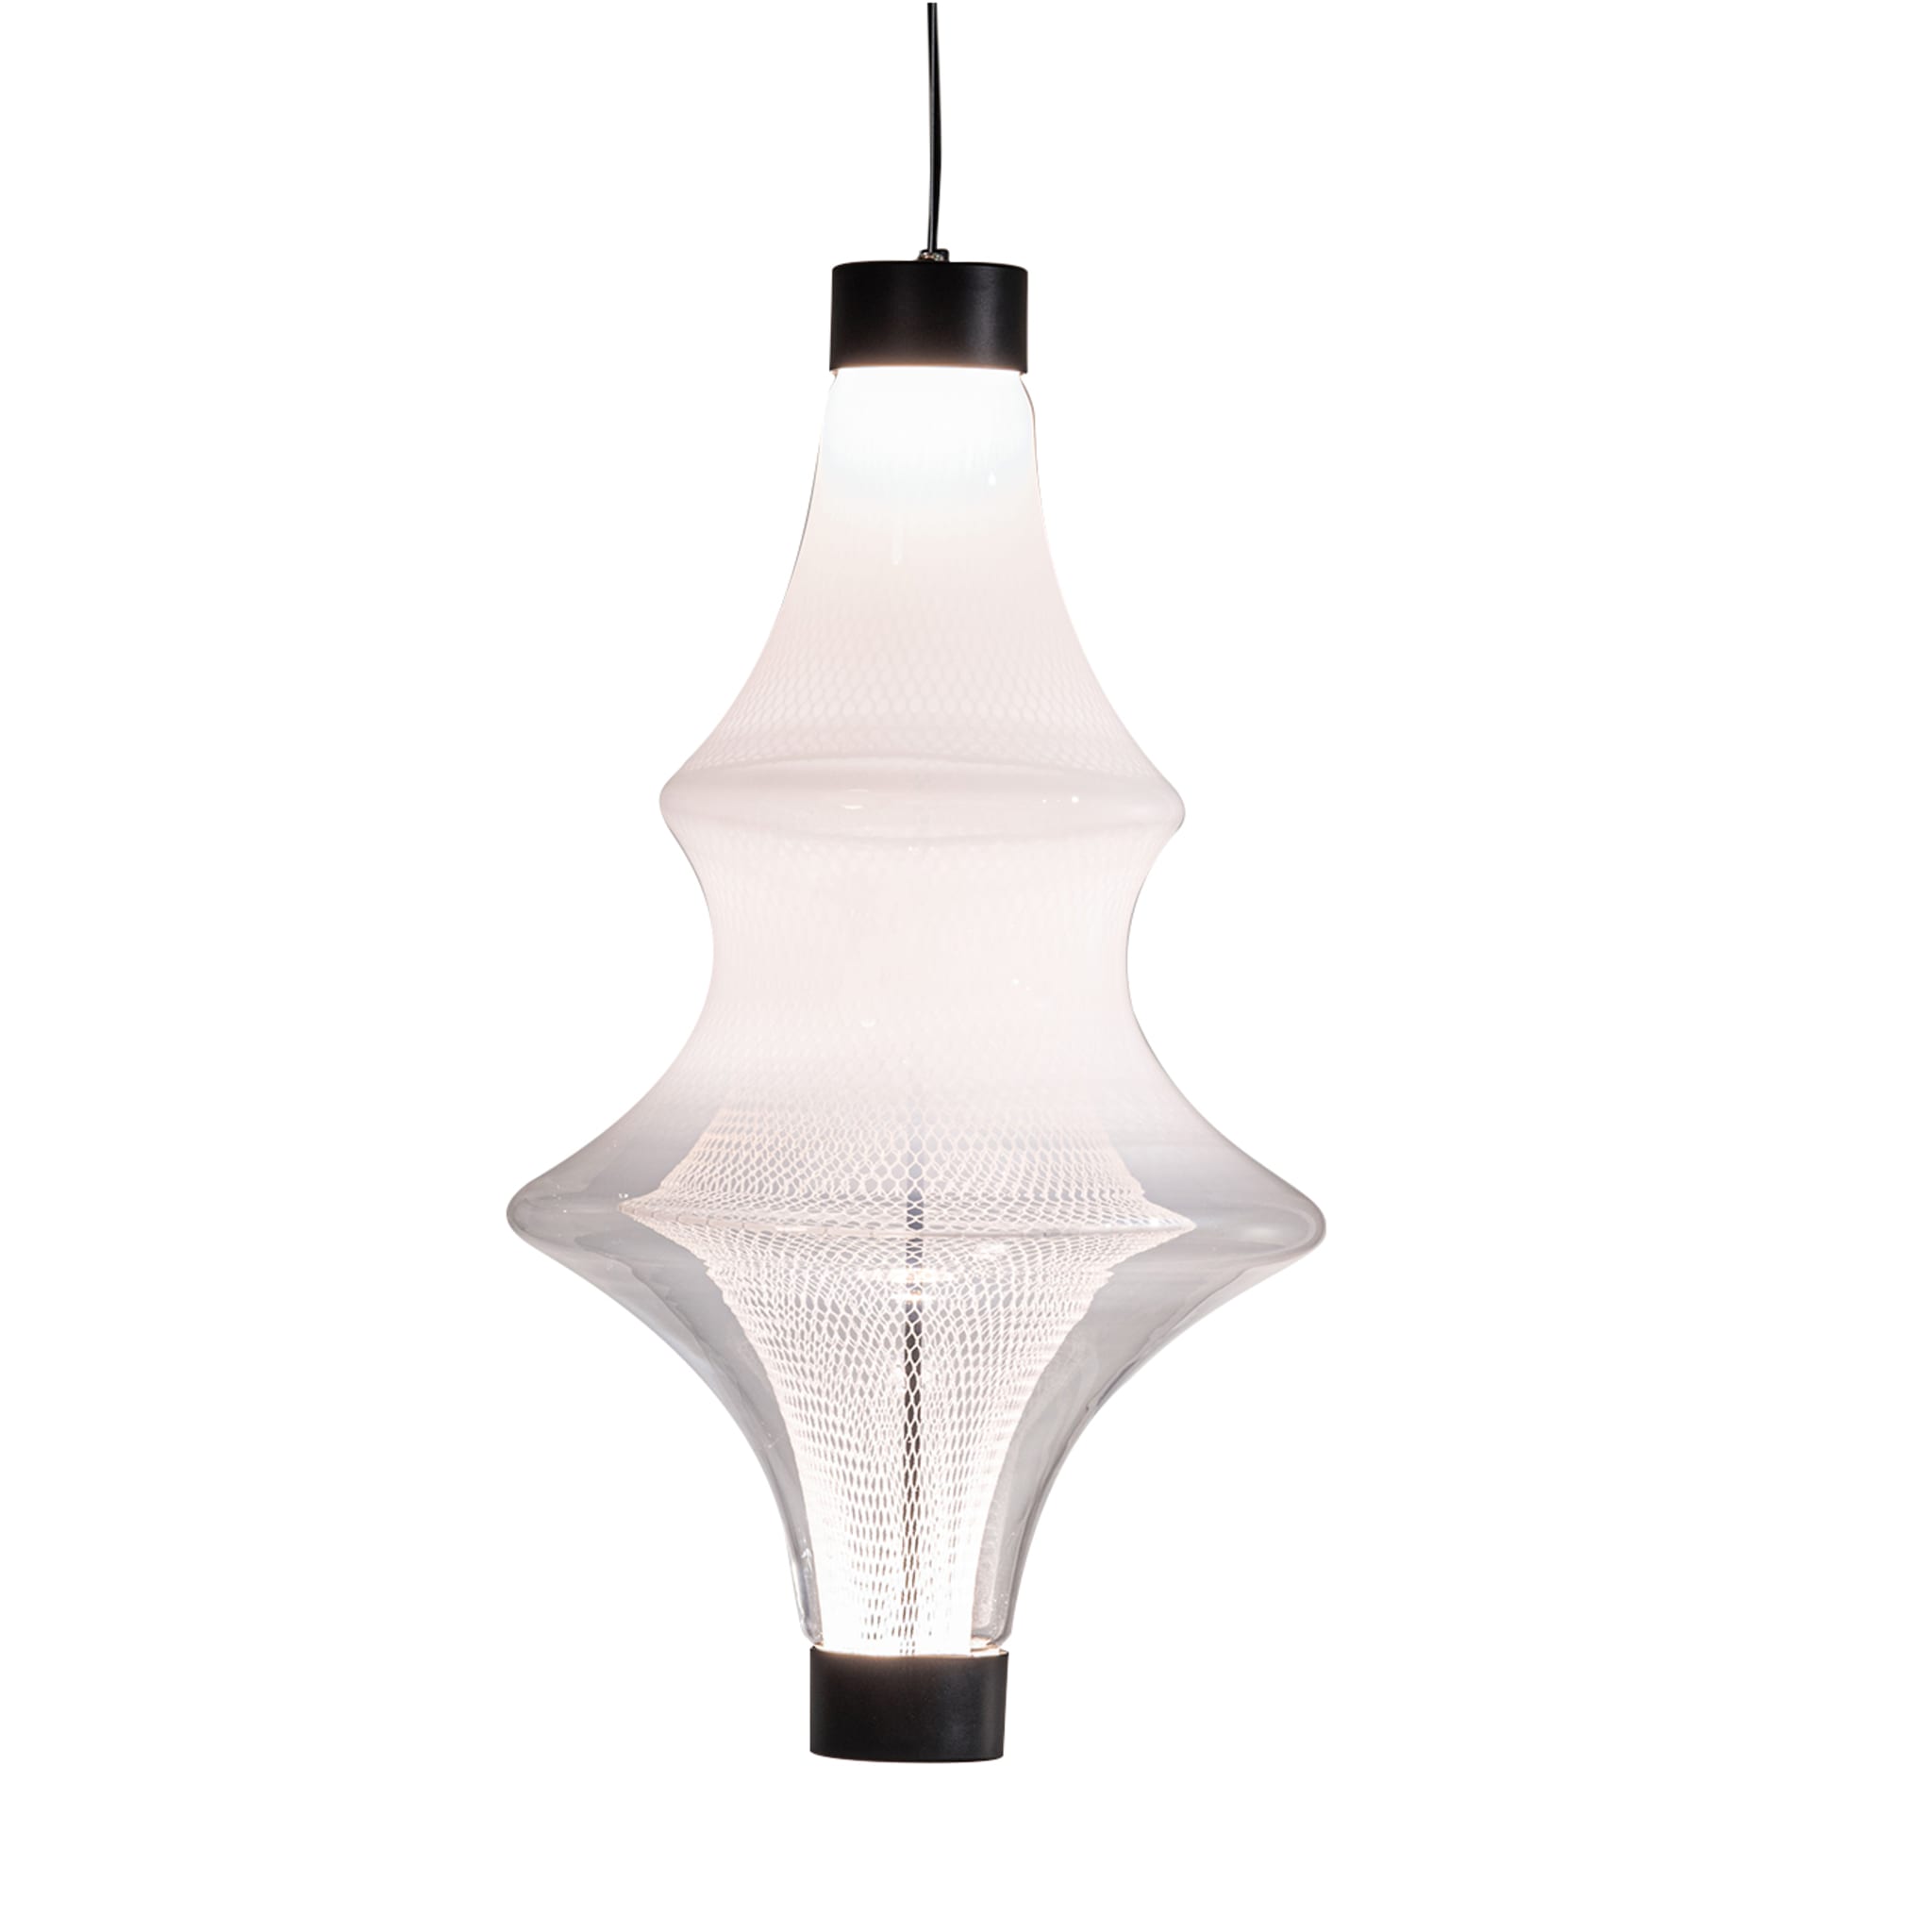 Nasse 01 Pendant Lamp by Marco Zito - Main view